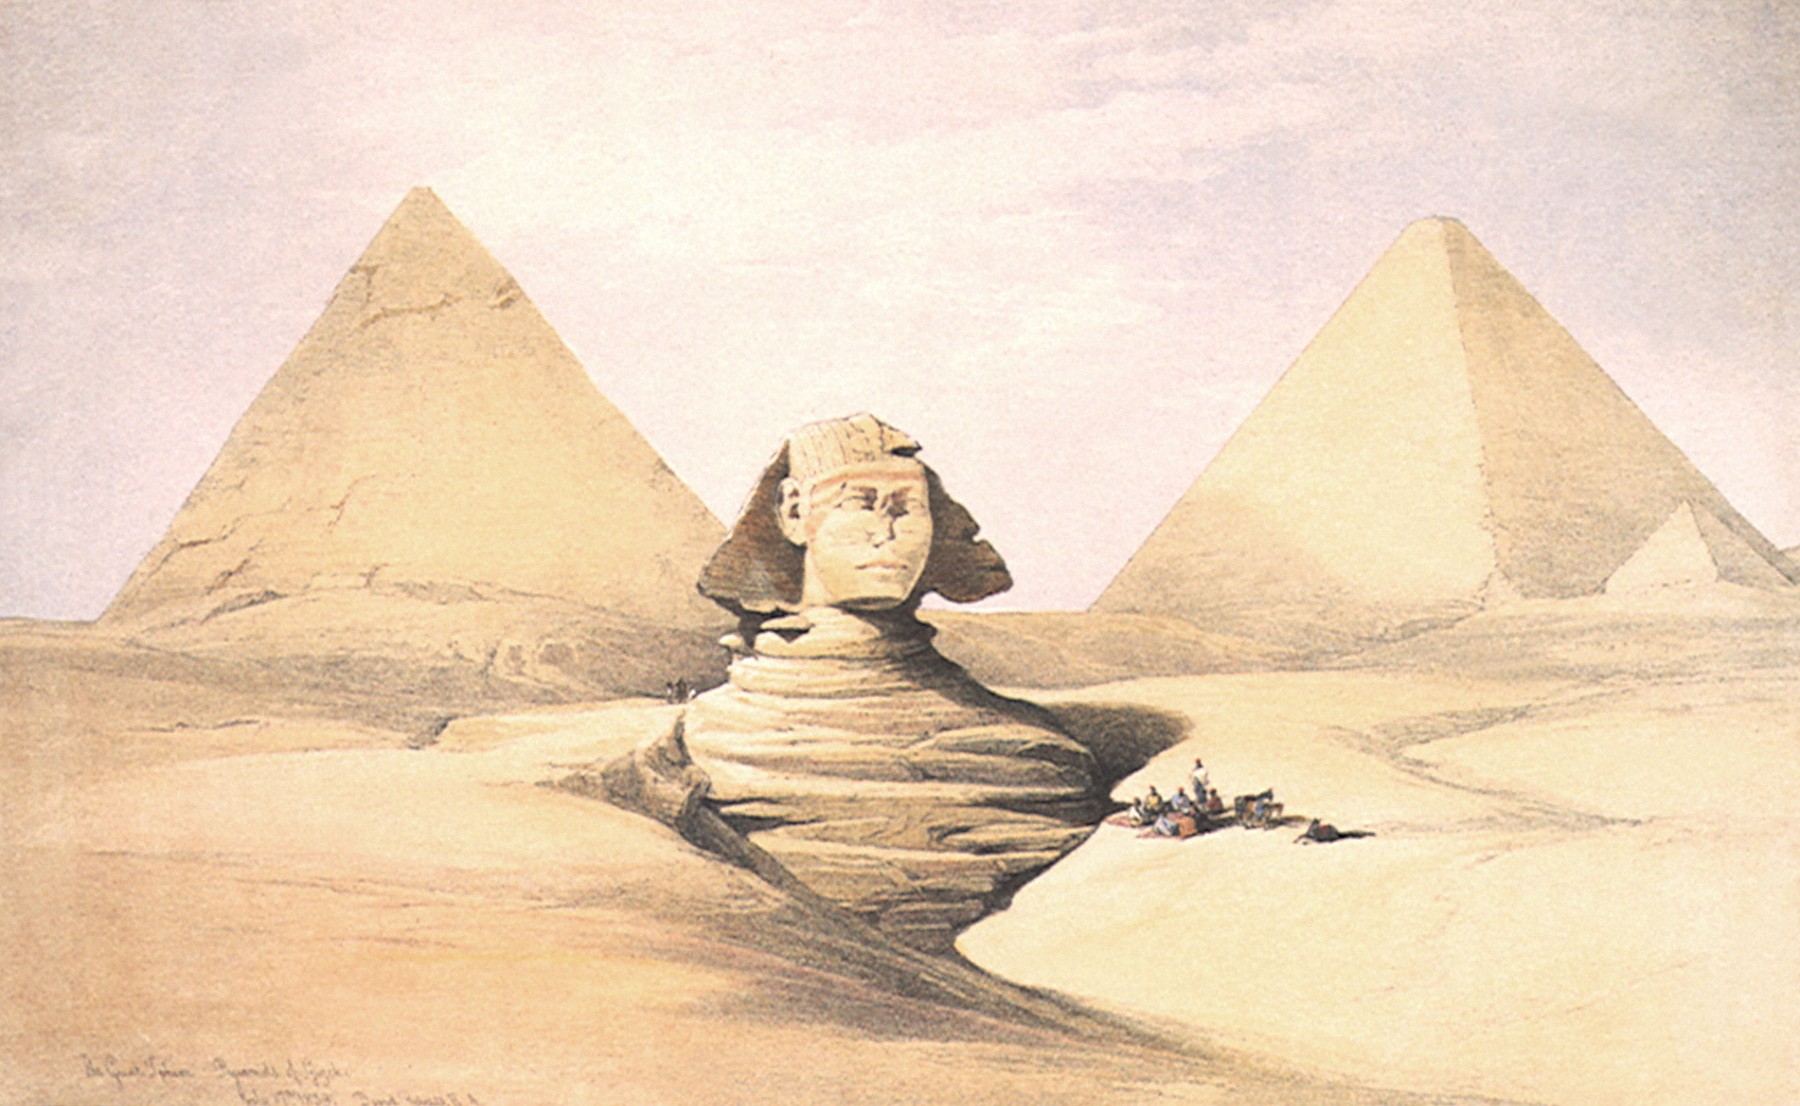 No more secrets, did they build the Sphinx in Egypt?  Scientists have come to a convincing conclusion